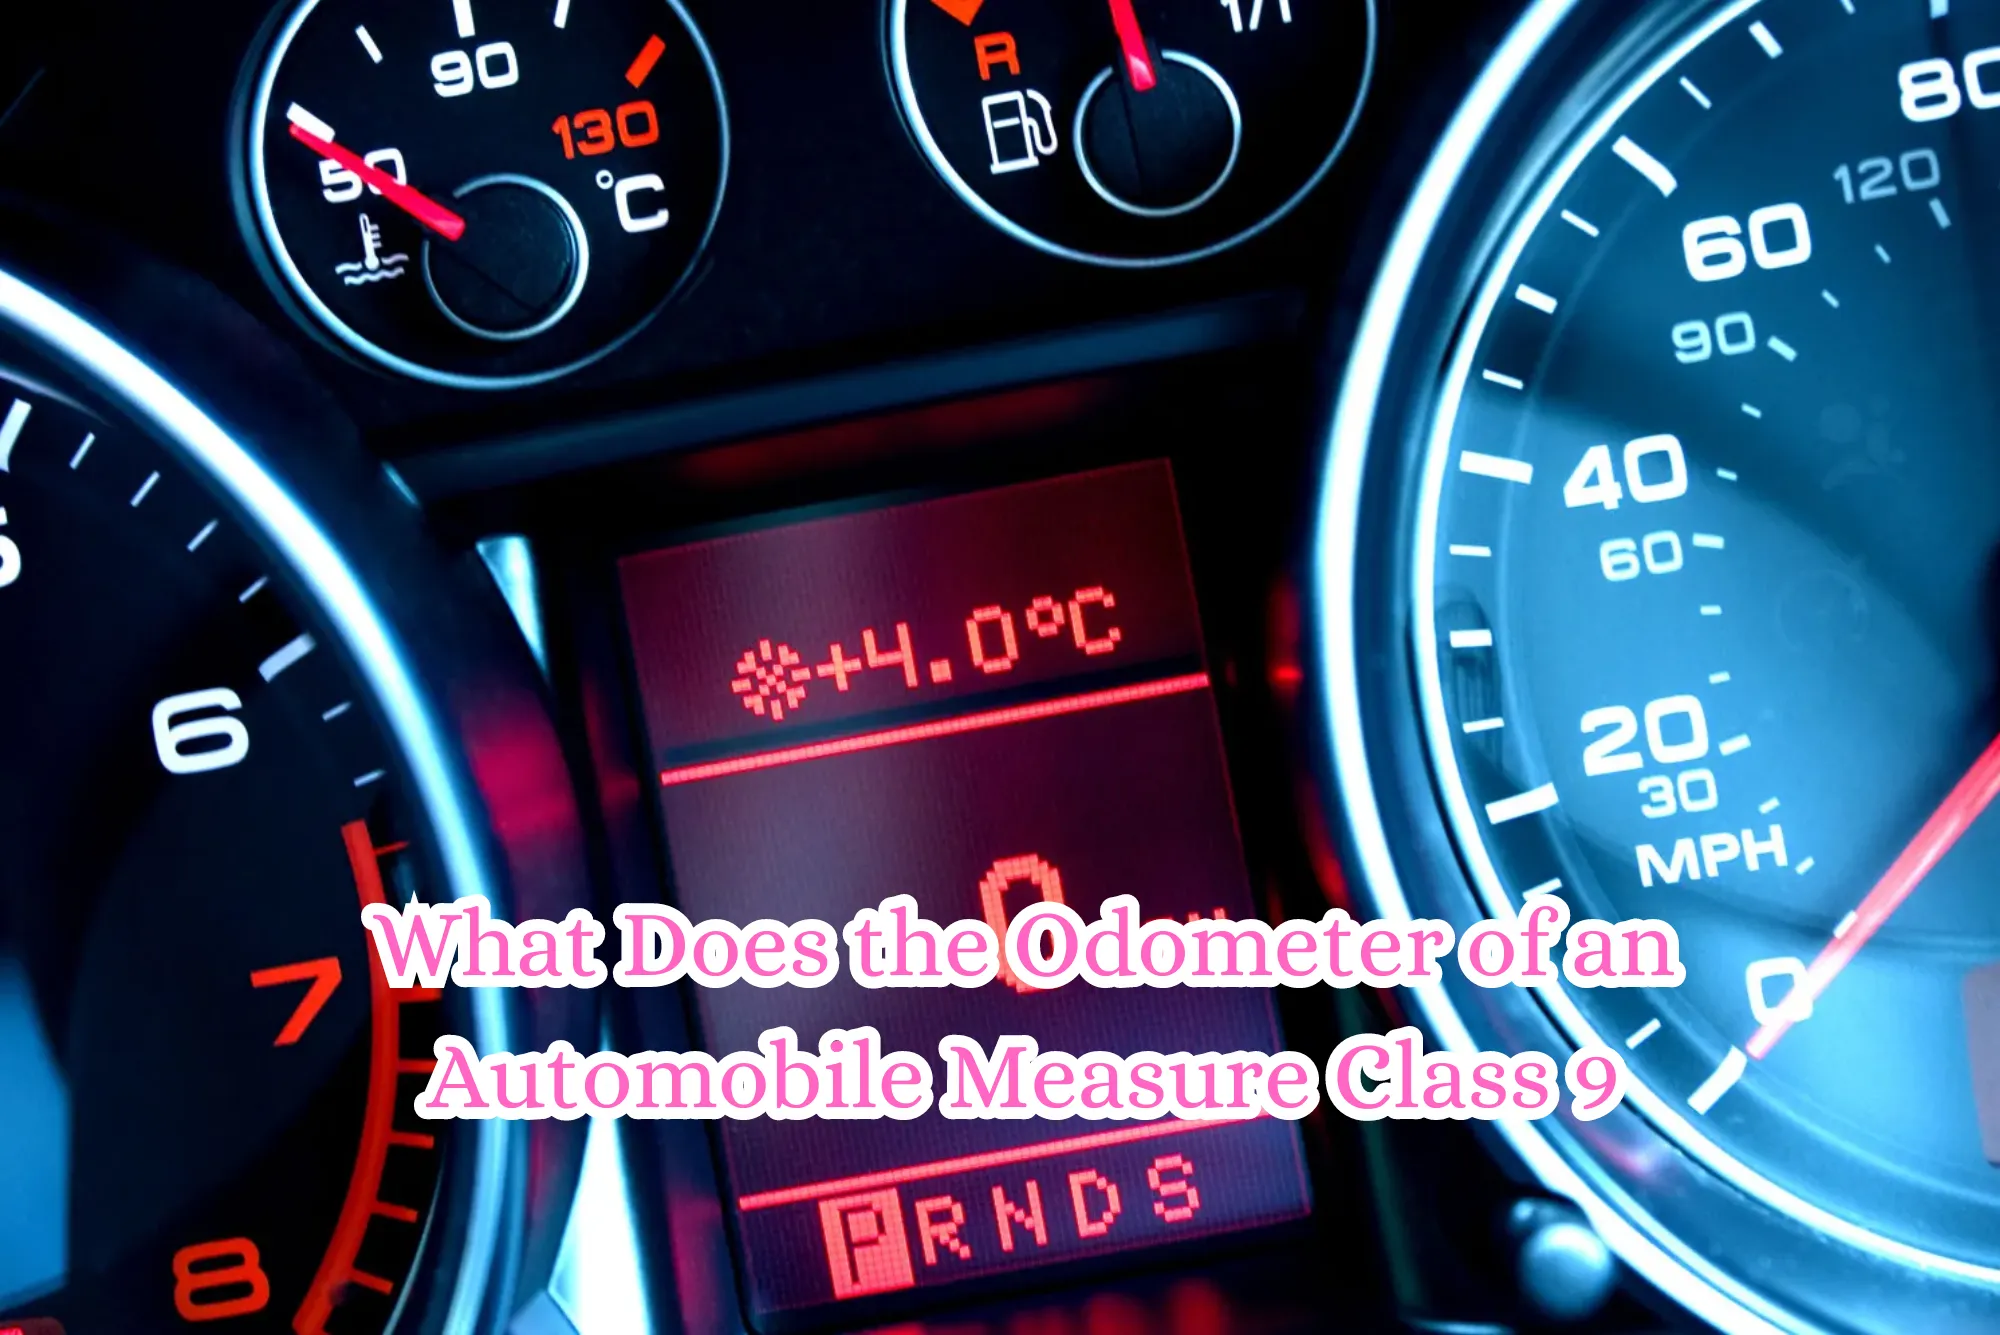 What Does the Odometer of an Automobile Measure Class 9